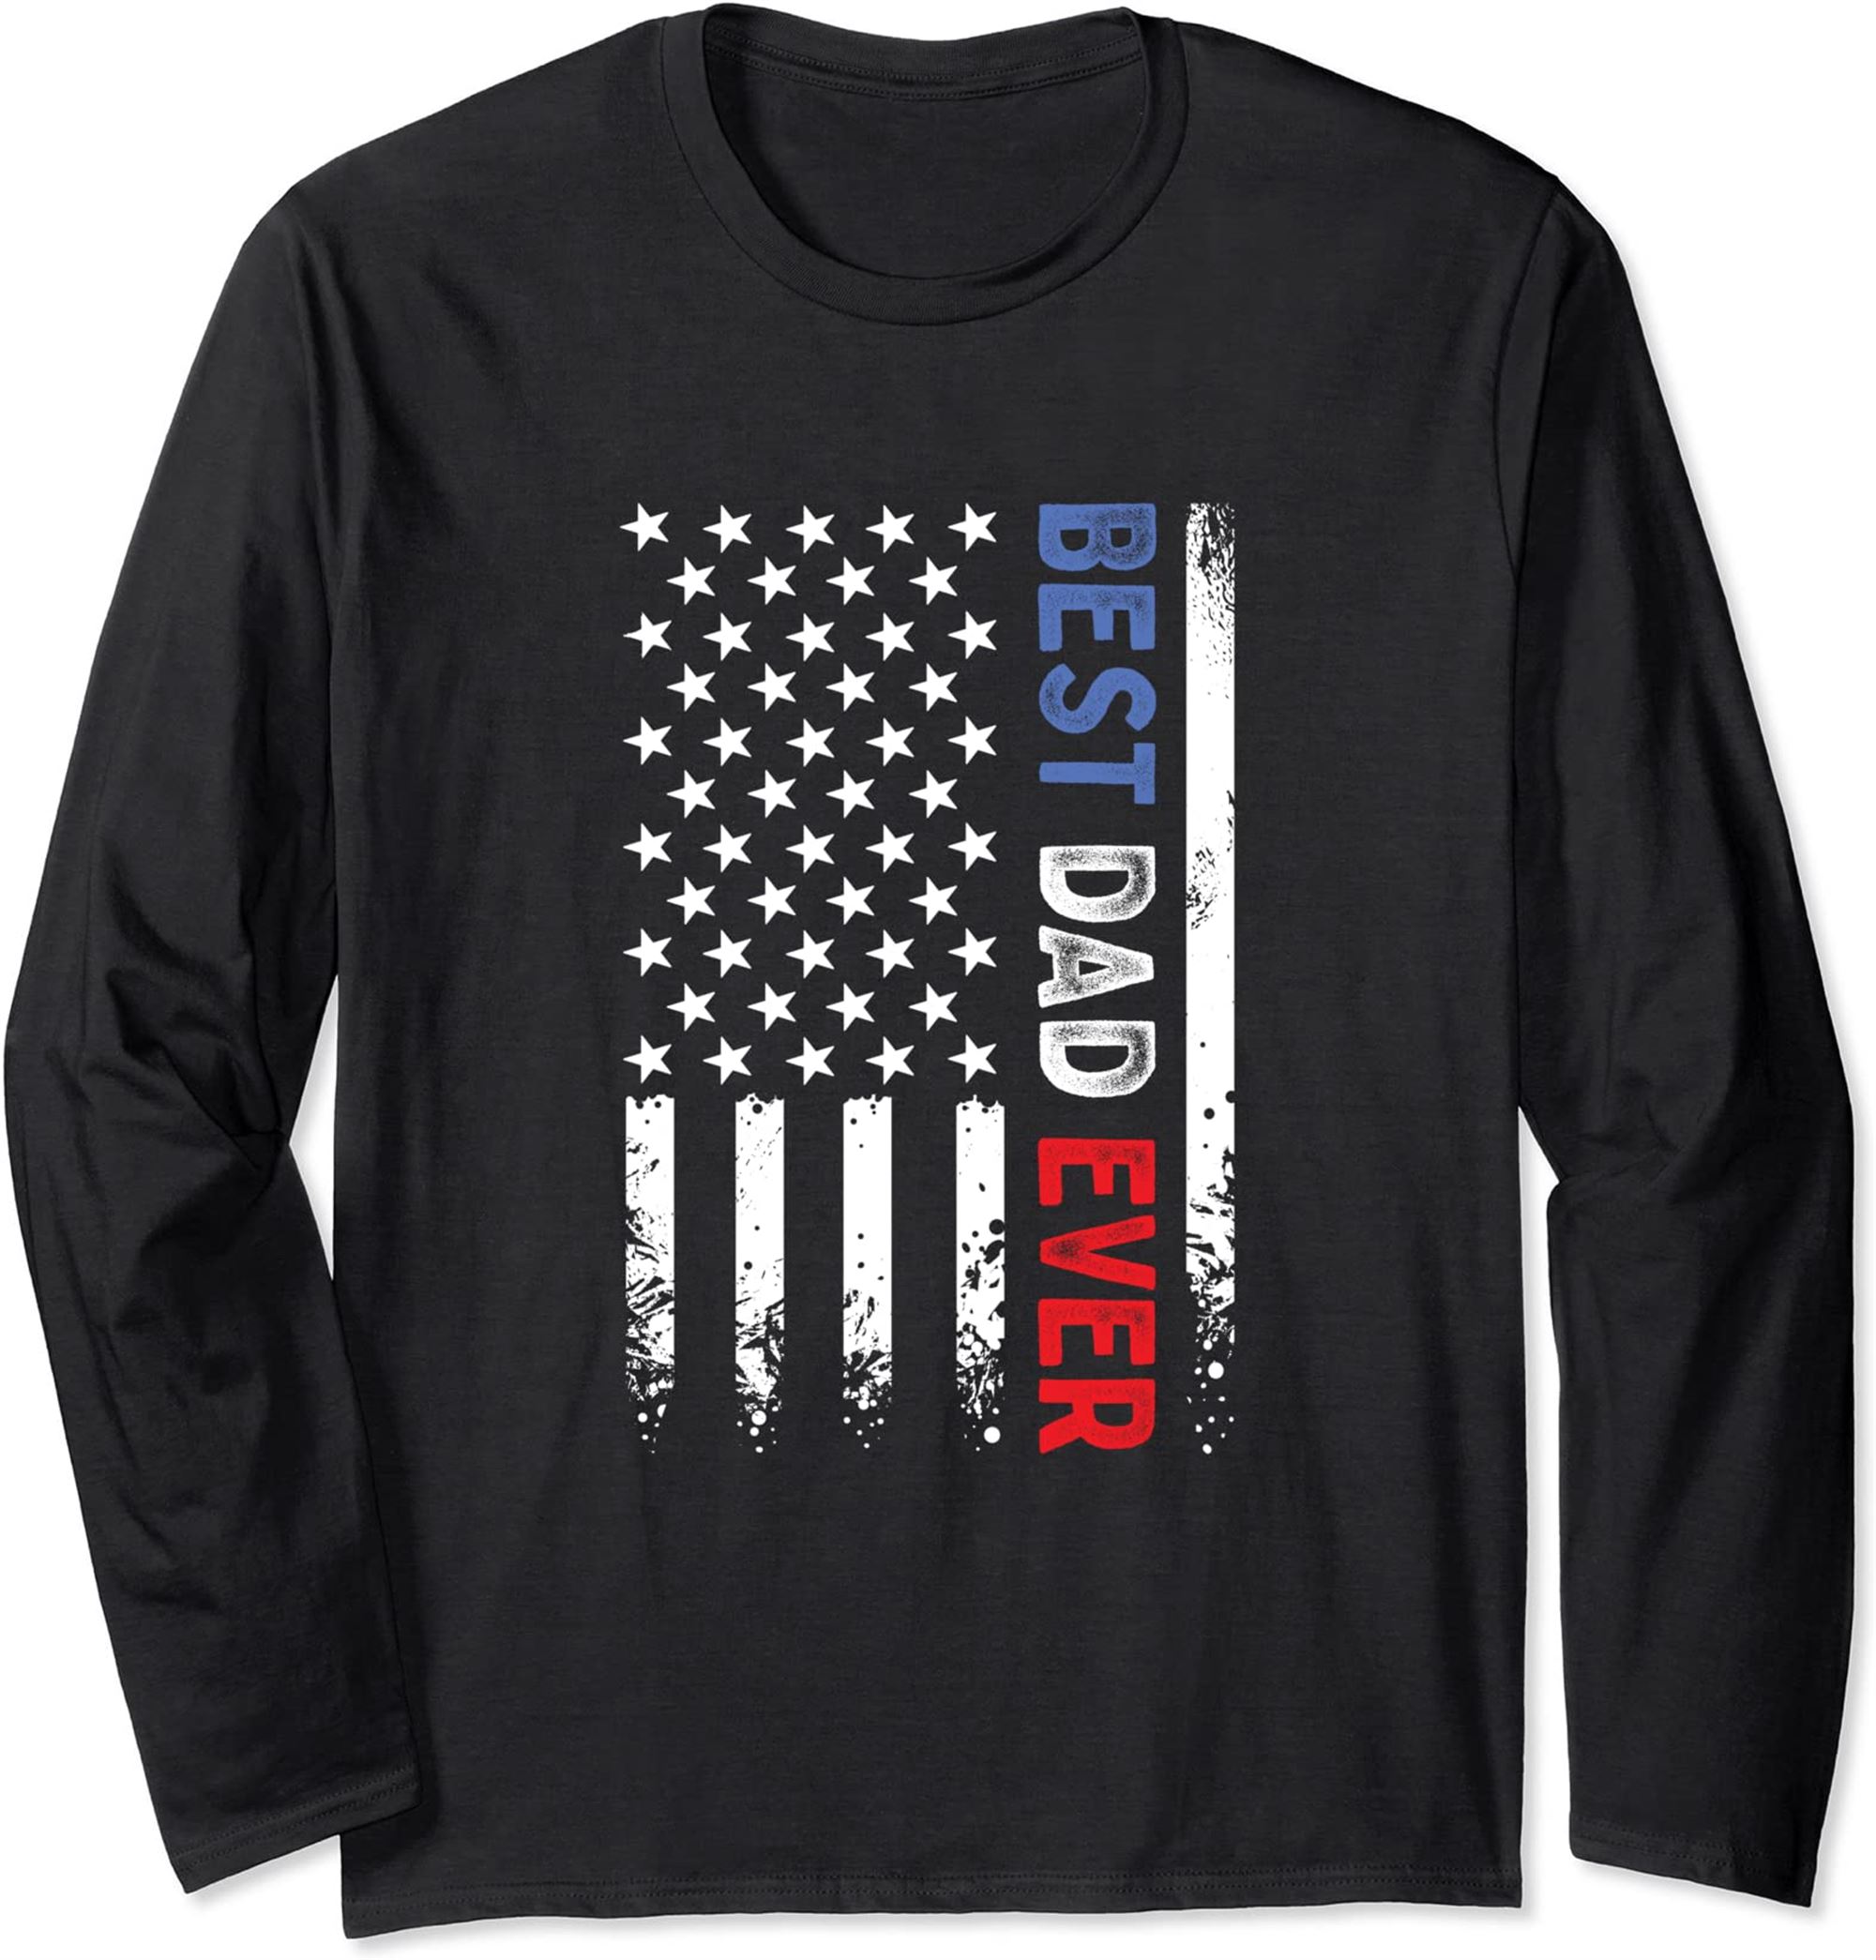 Fathers Day Best Dad Ever With Us American Flag Long Sleeve T-shirt Full Size Up To 5xl